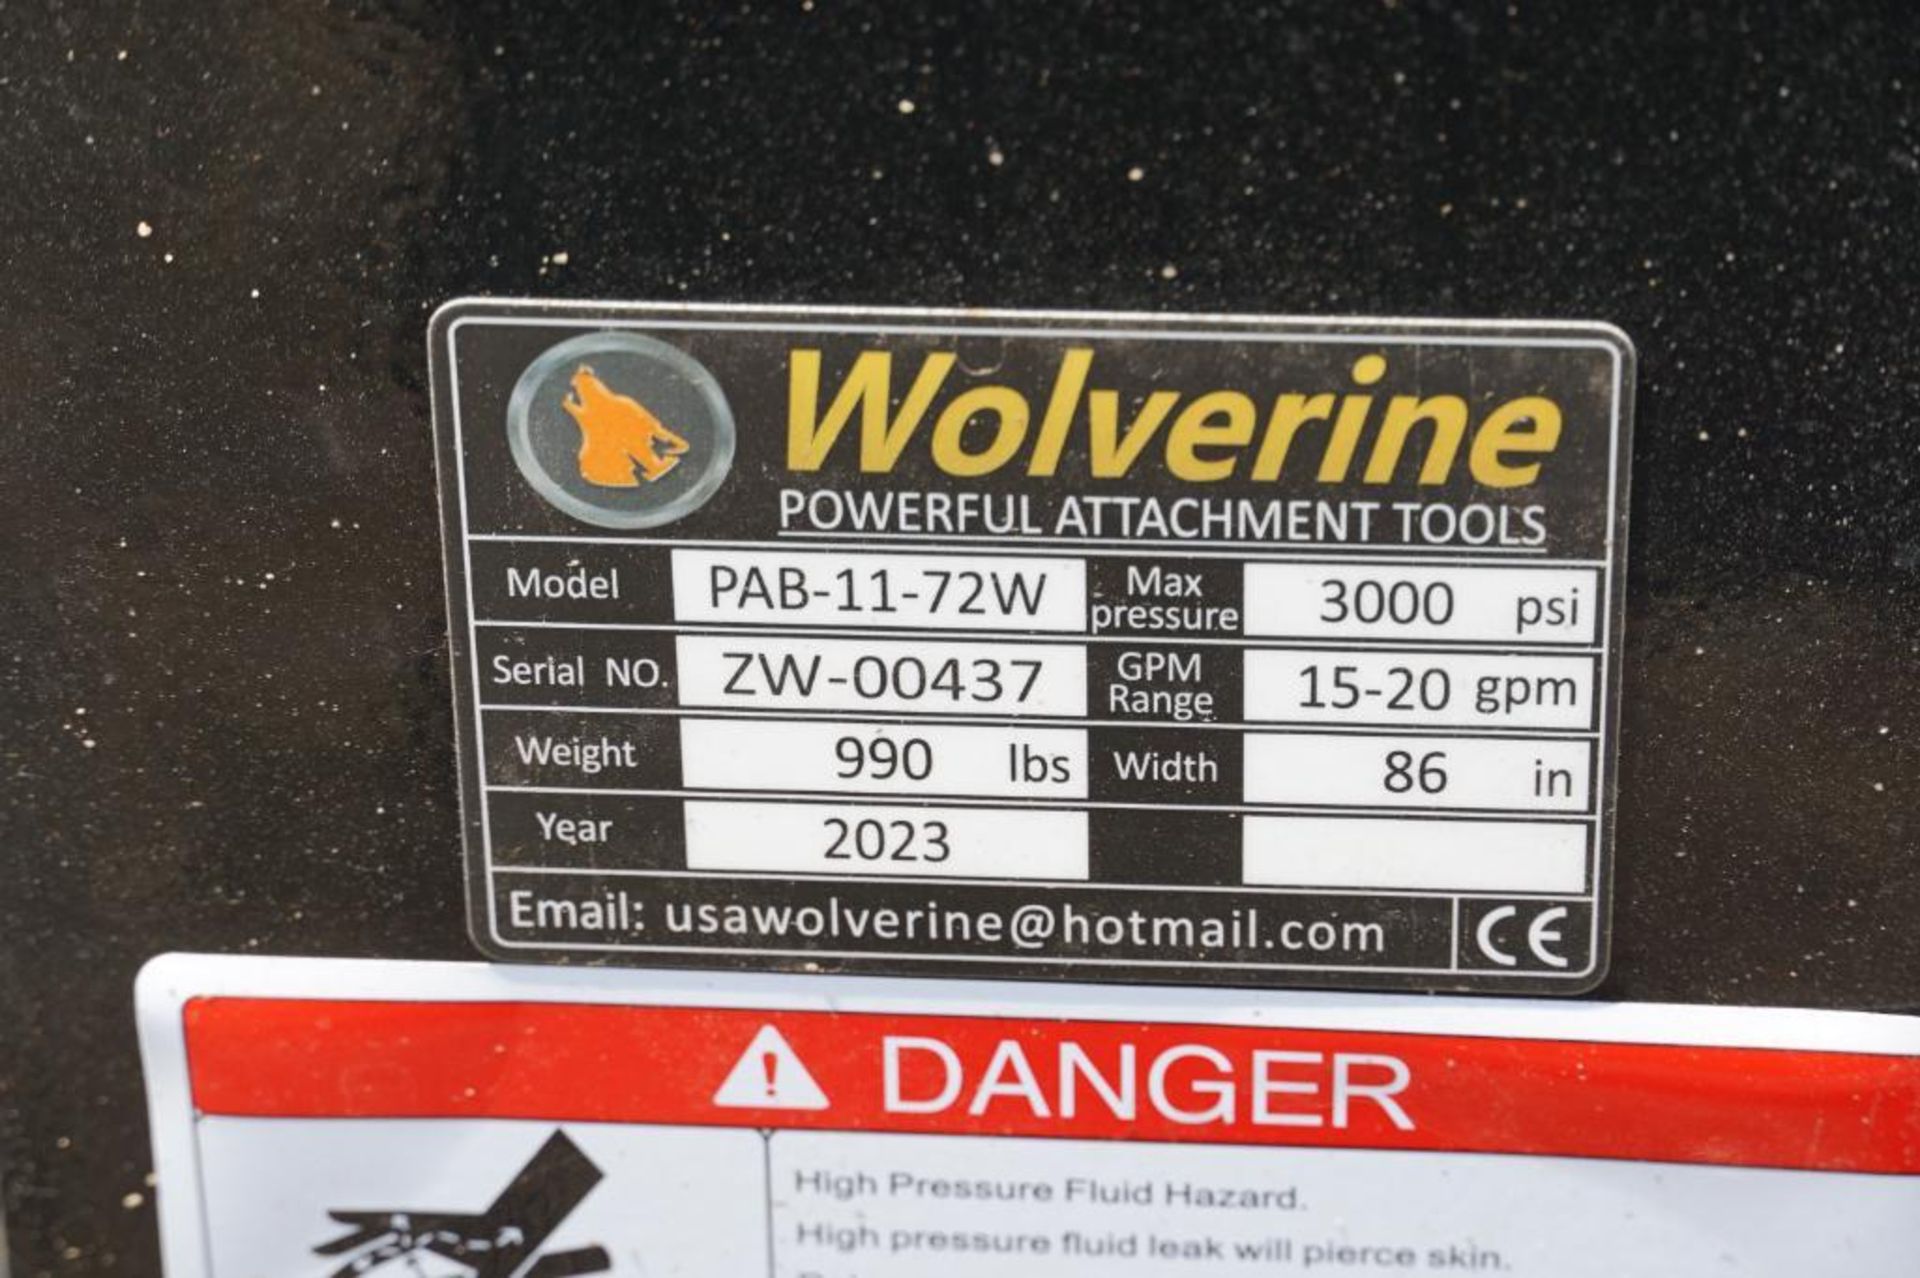 New! 2023 Wolverine Skid Steer Angle Broom Industrial Series Attachment - Image 5 of 5